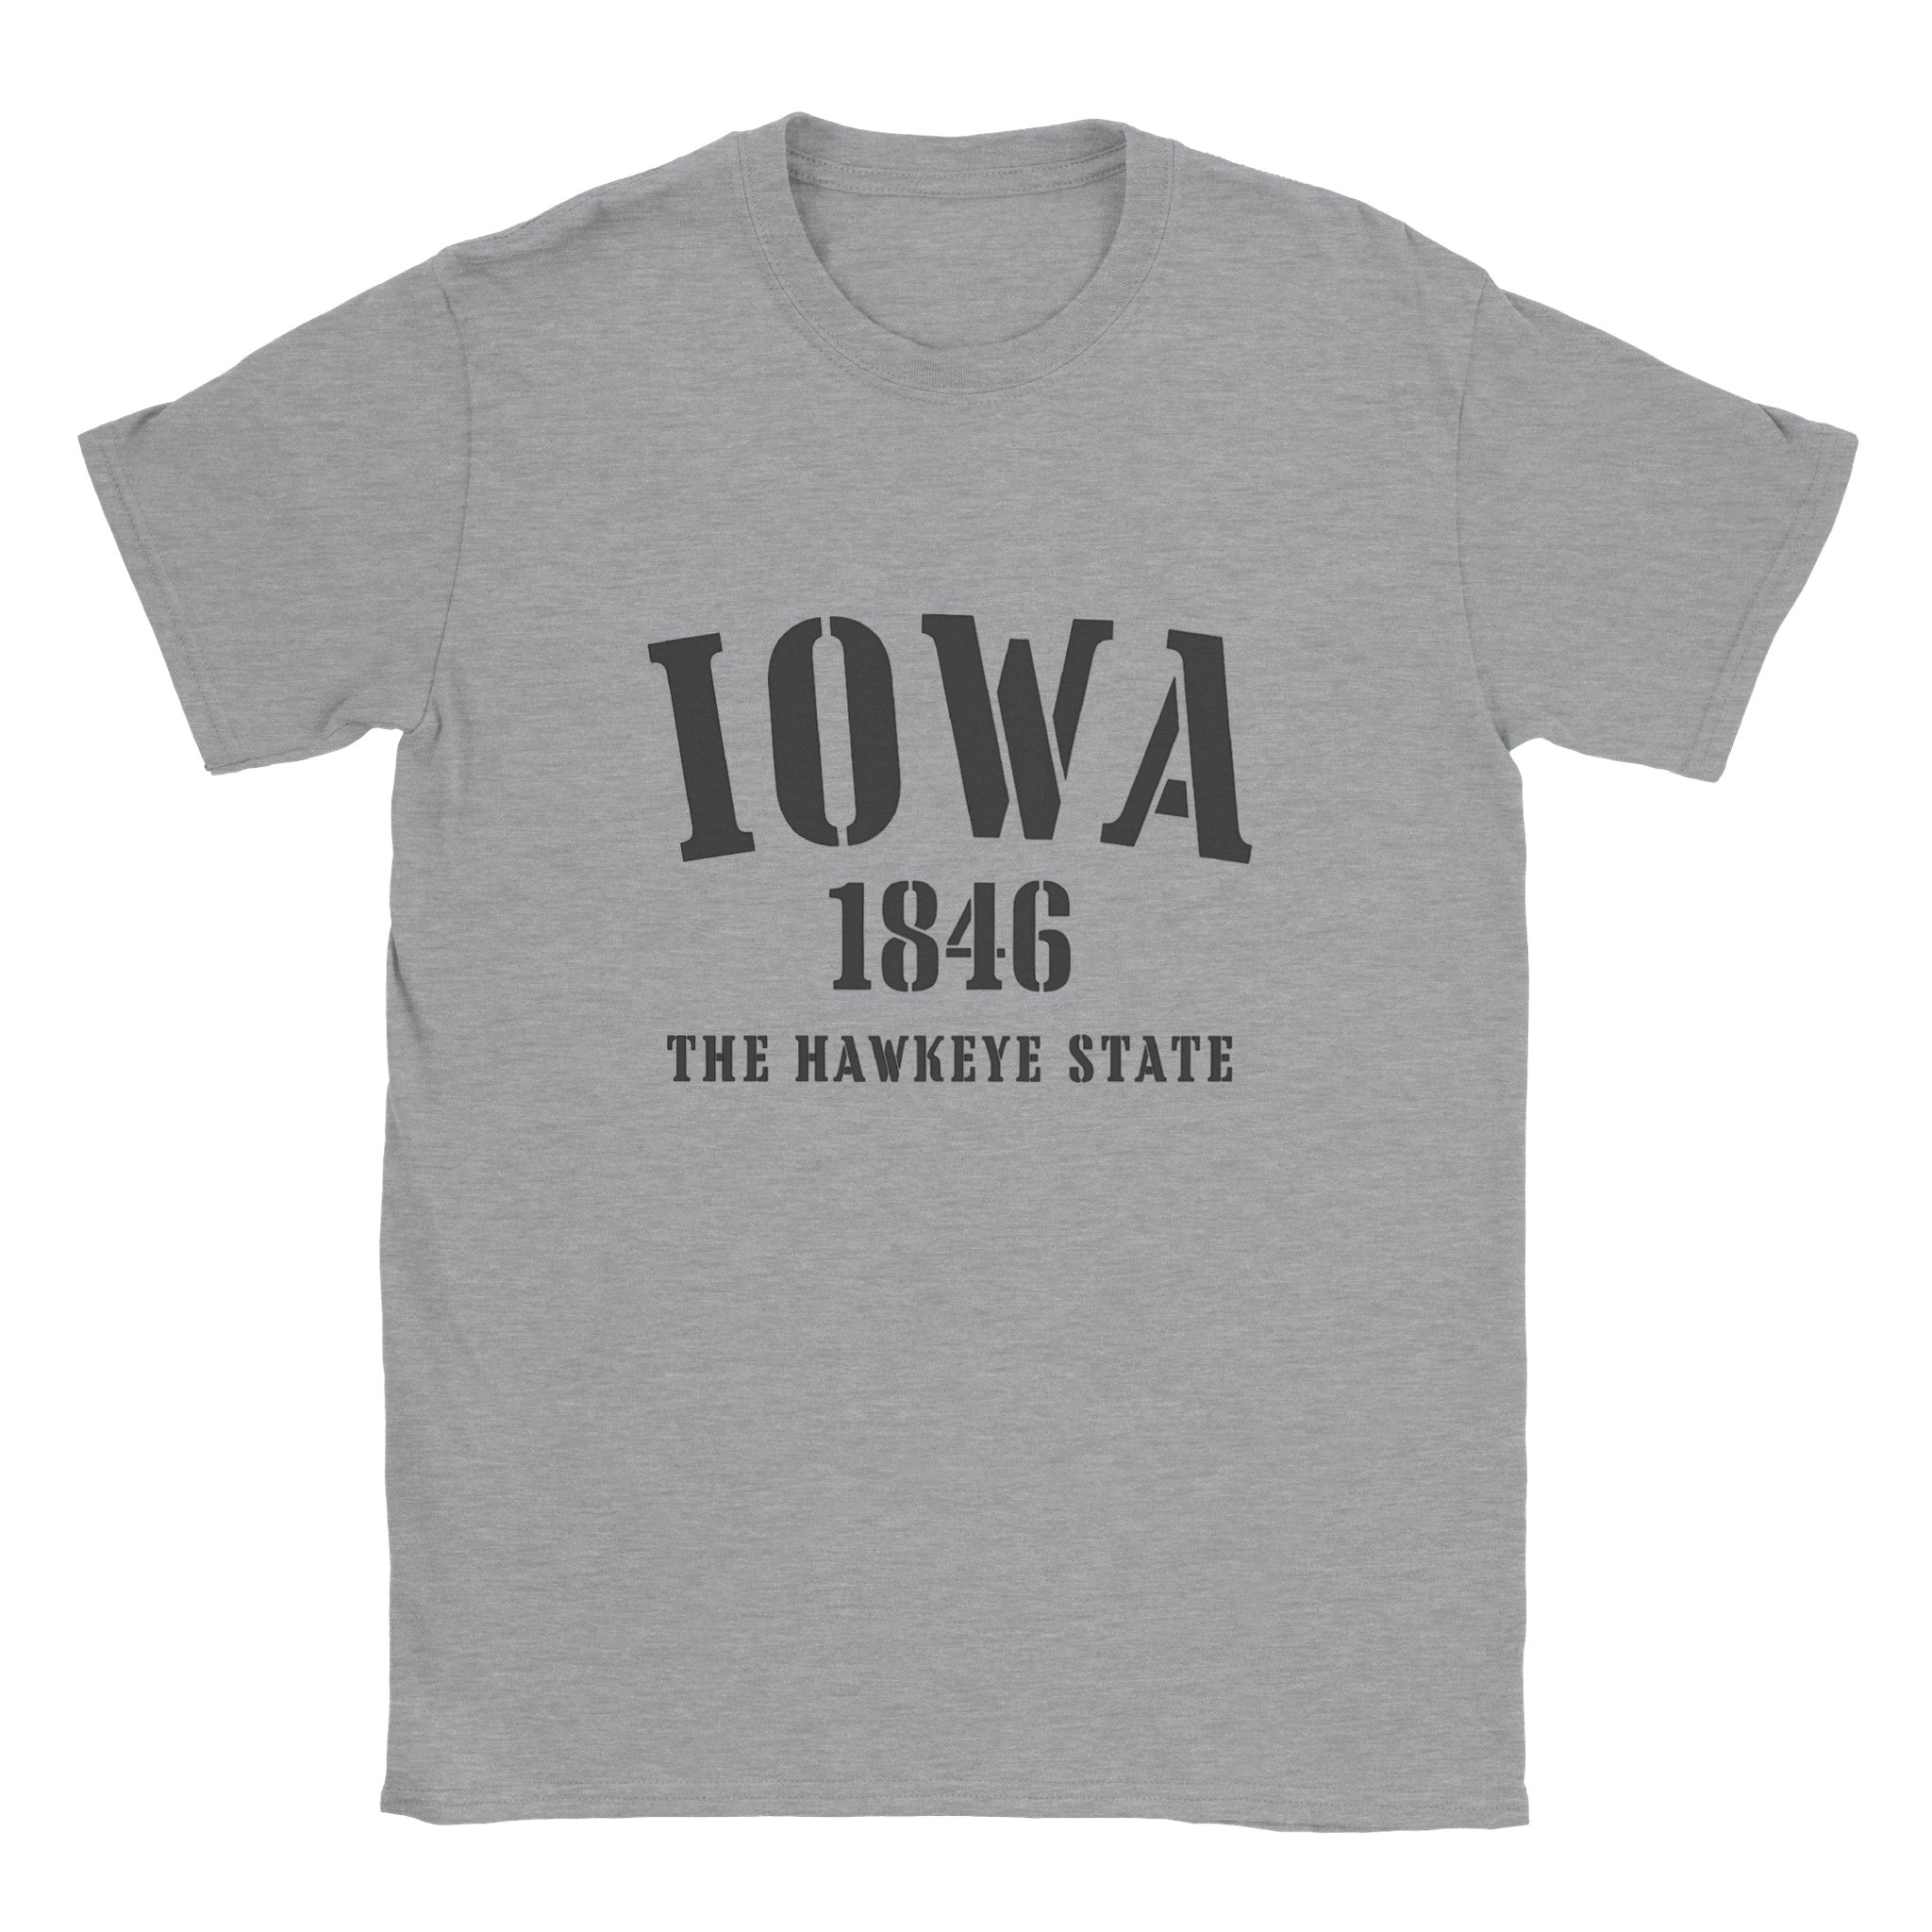 Iowa- Classic Unisex Crewneck States T-shirt - Creations by Chris and Carlos